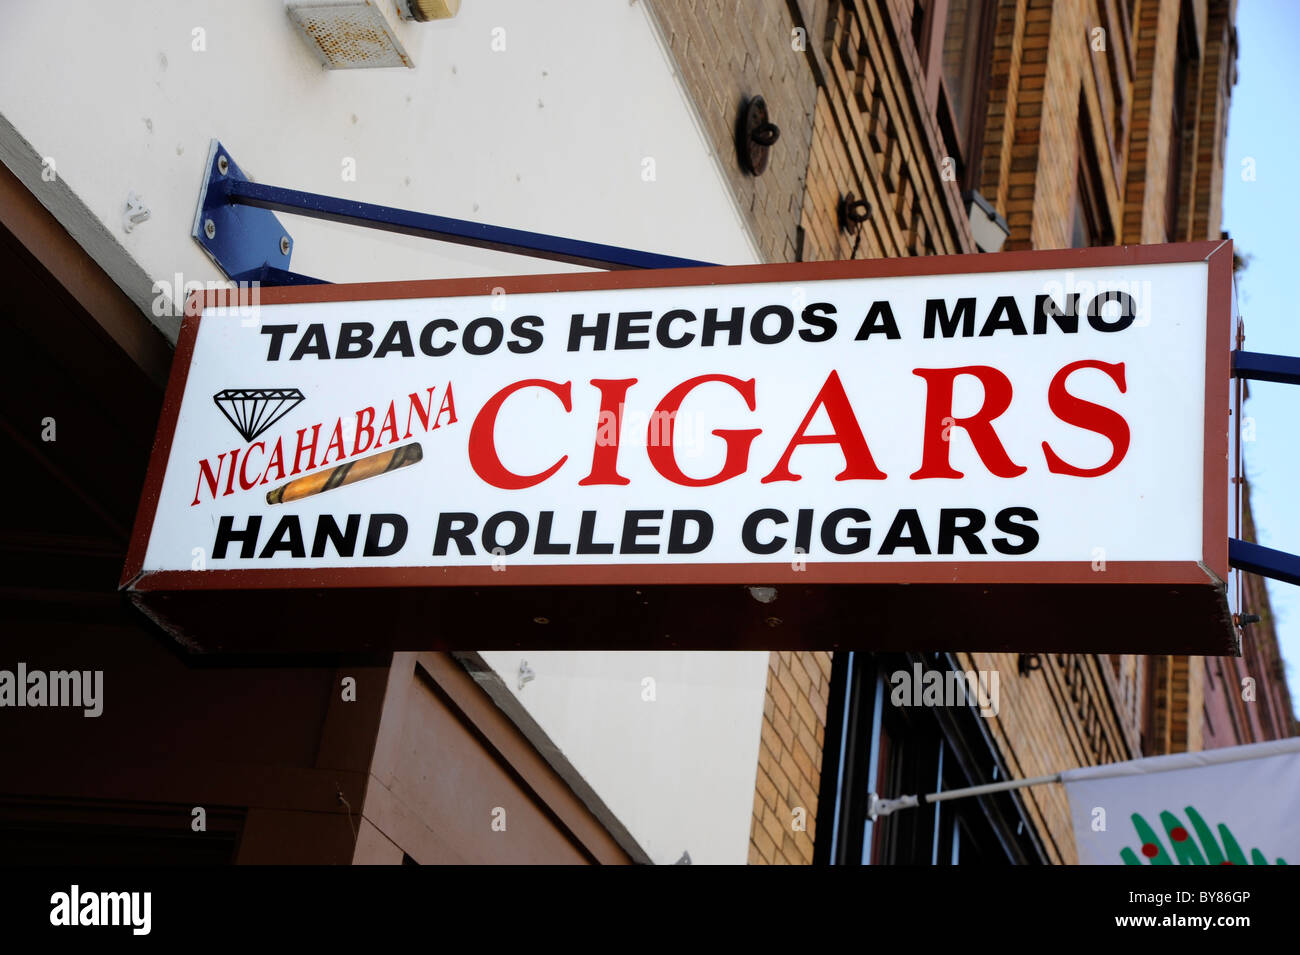 Ybor City Spanish culture center in Tampa Florida selling cigars Stock Photo